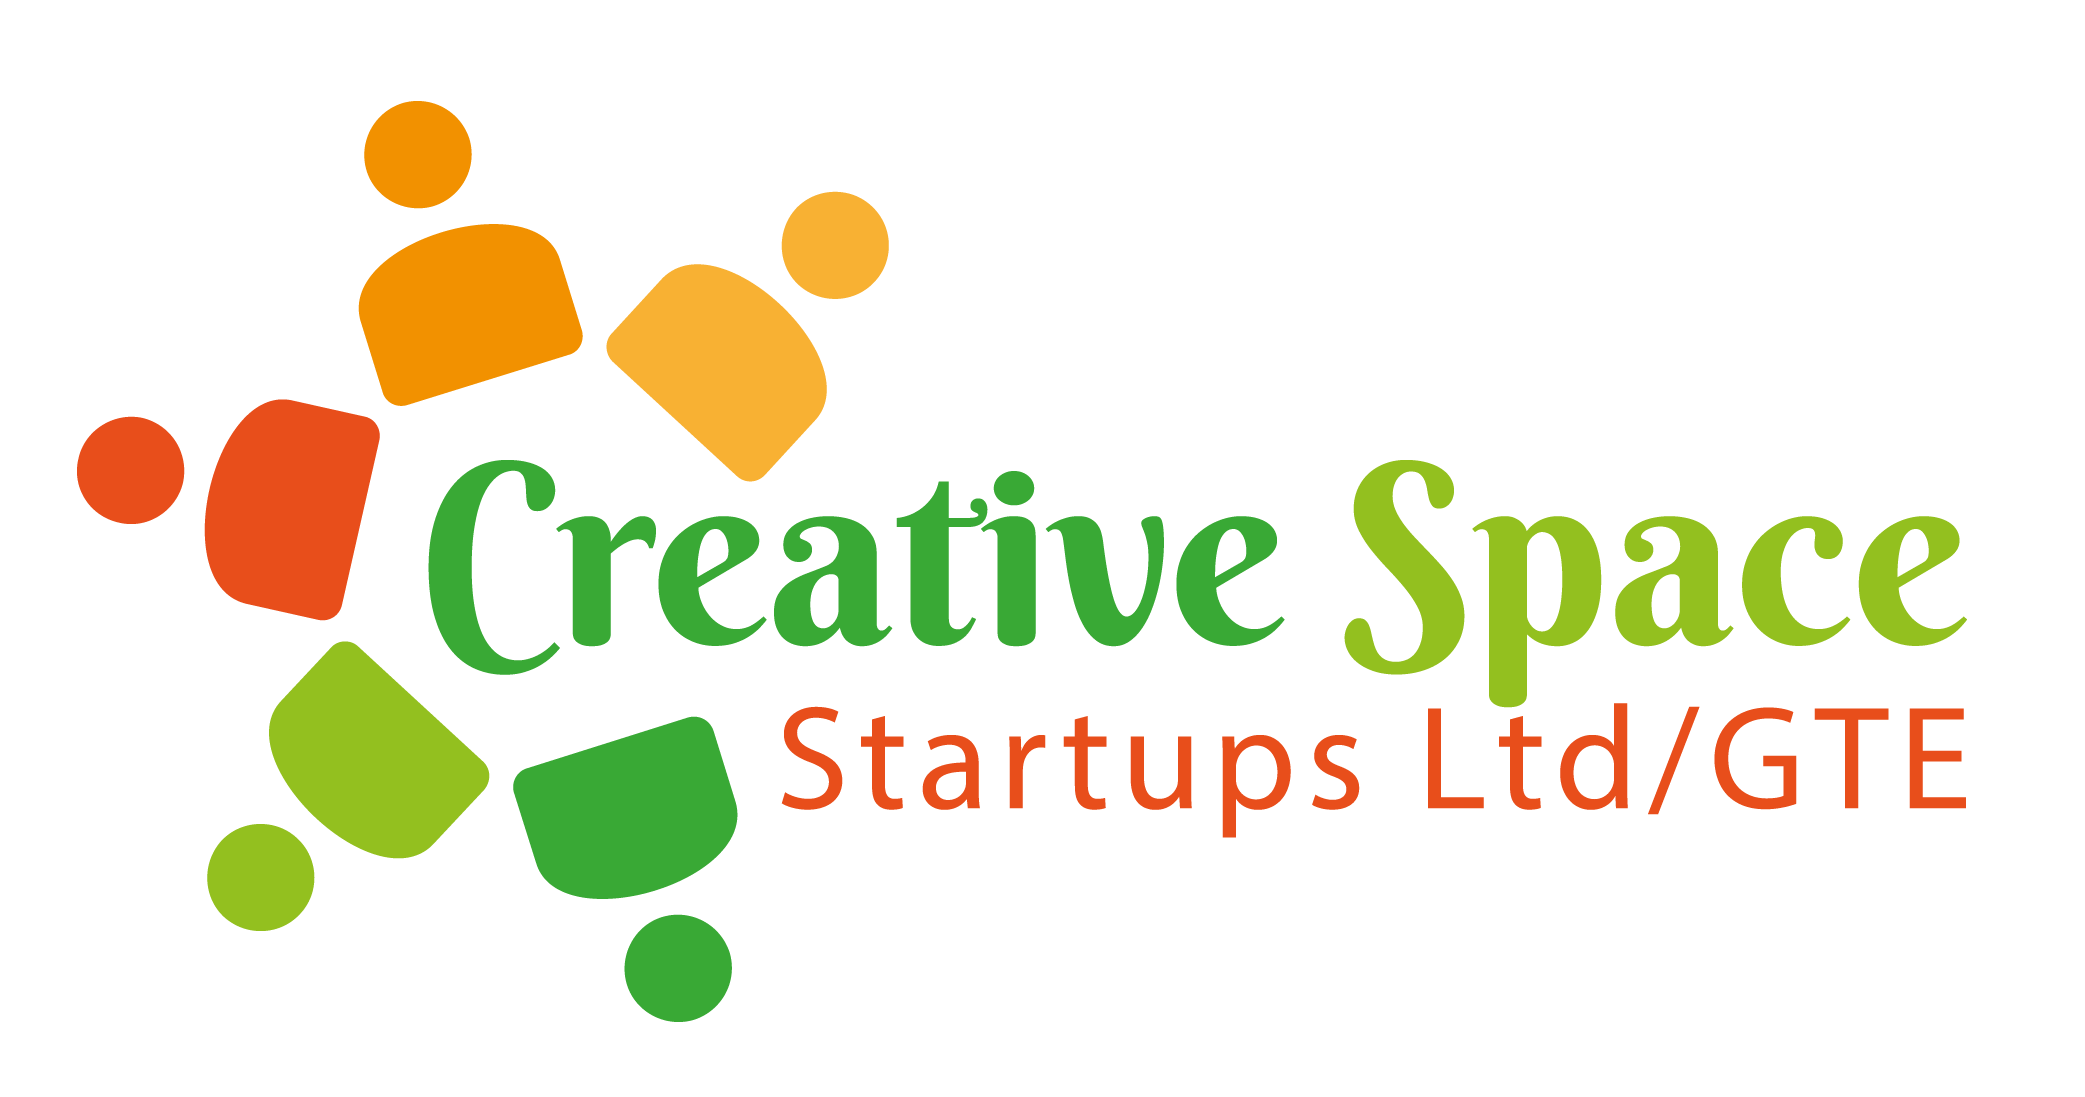 Creative Space Logo PNG -01 (1)